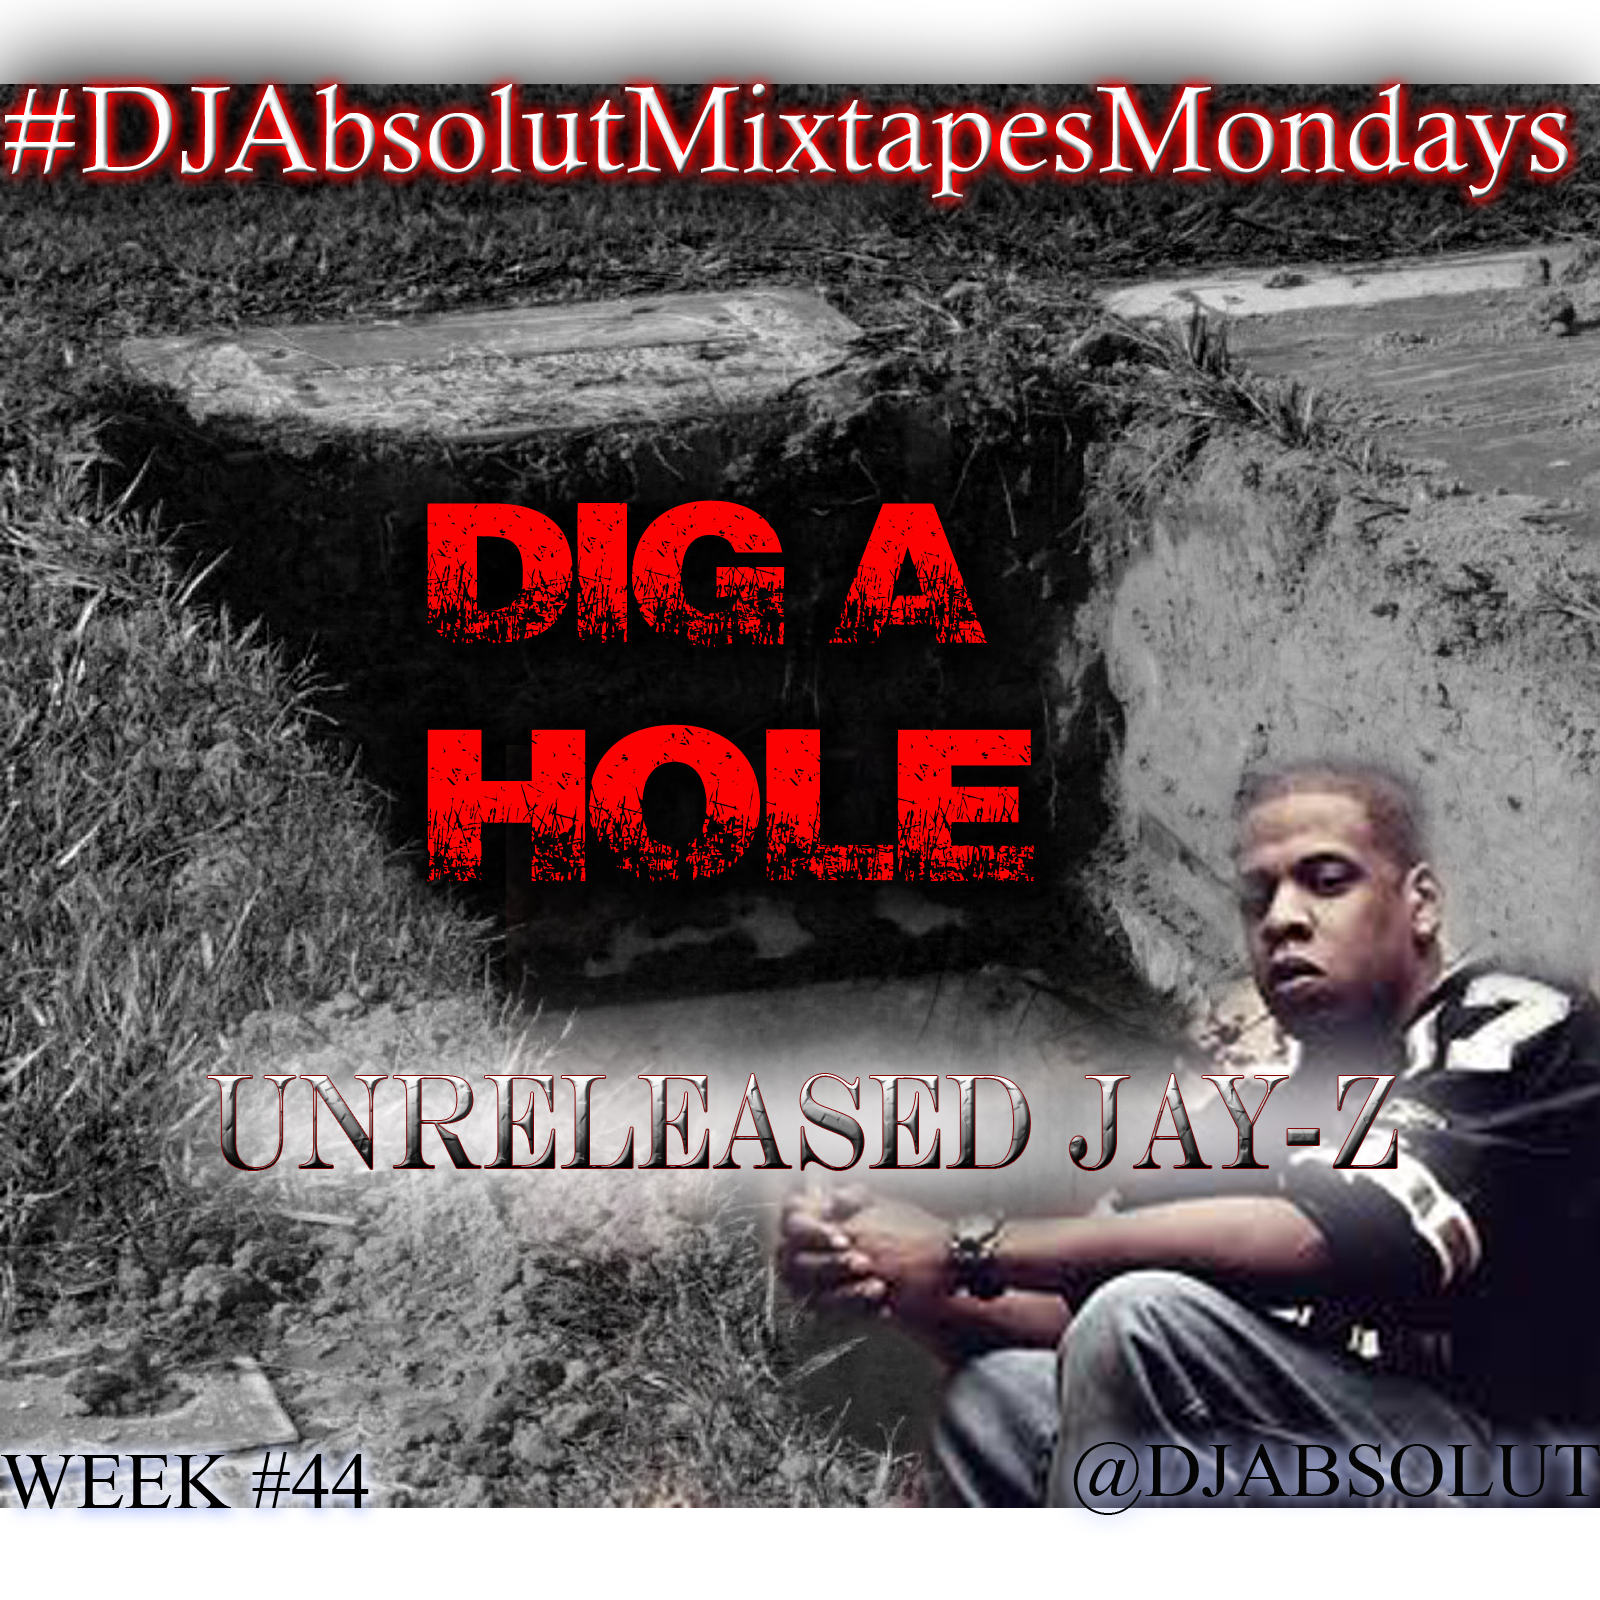 Jay-Z "Dig A Hole" (unreleased) [audio]